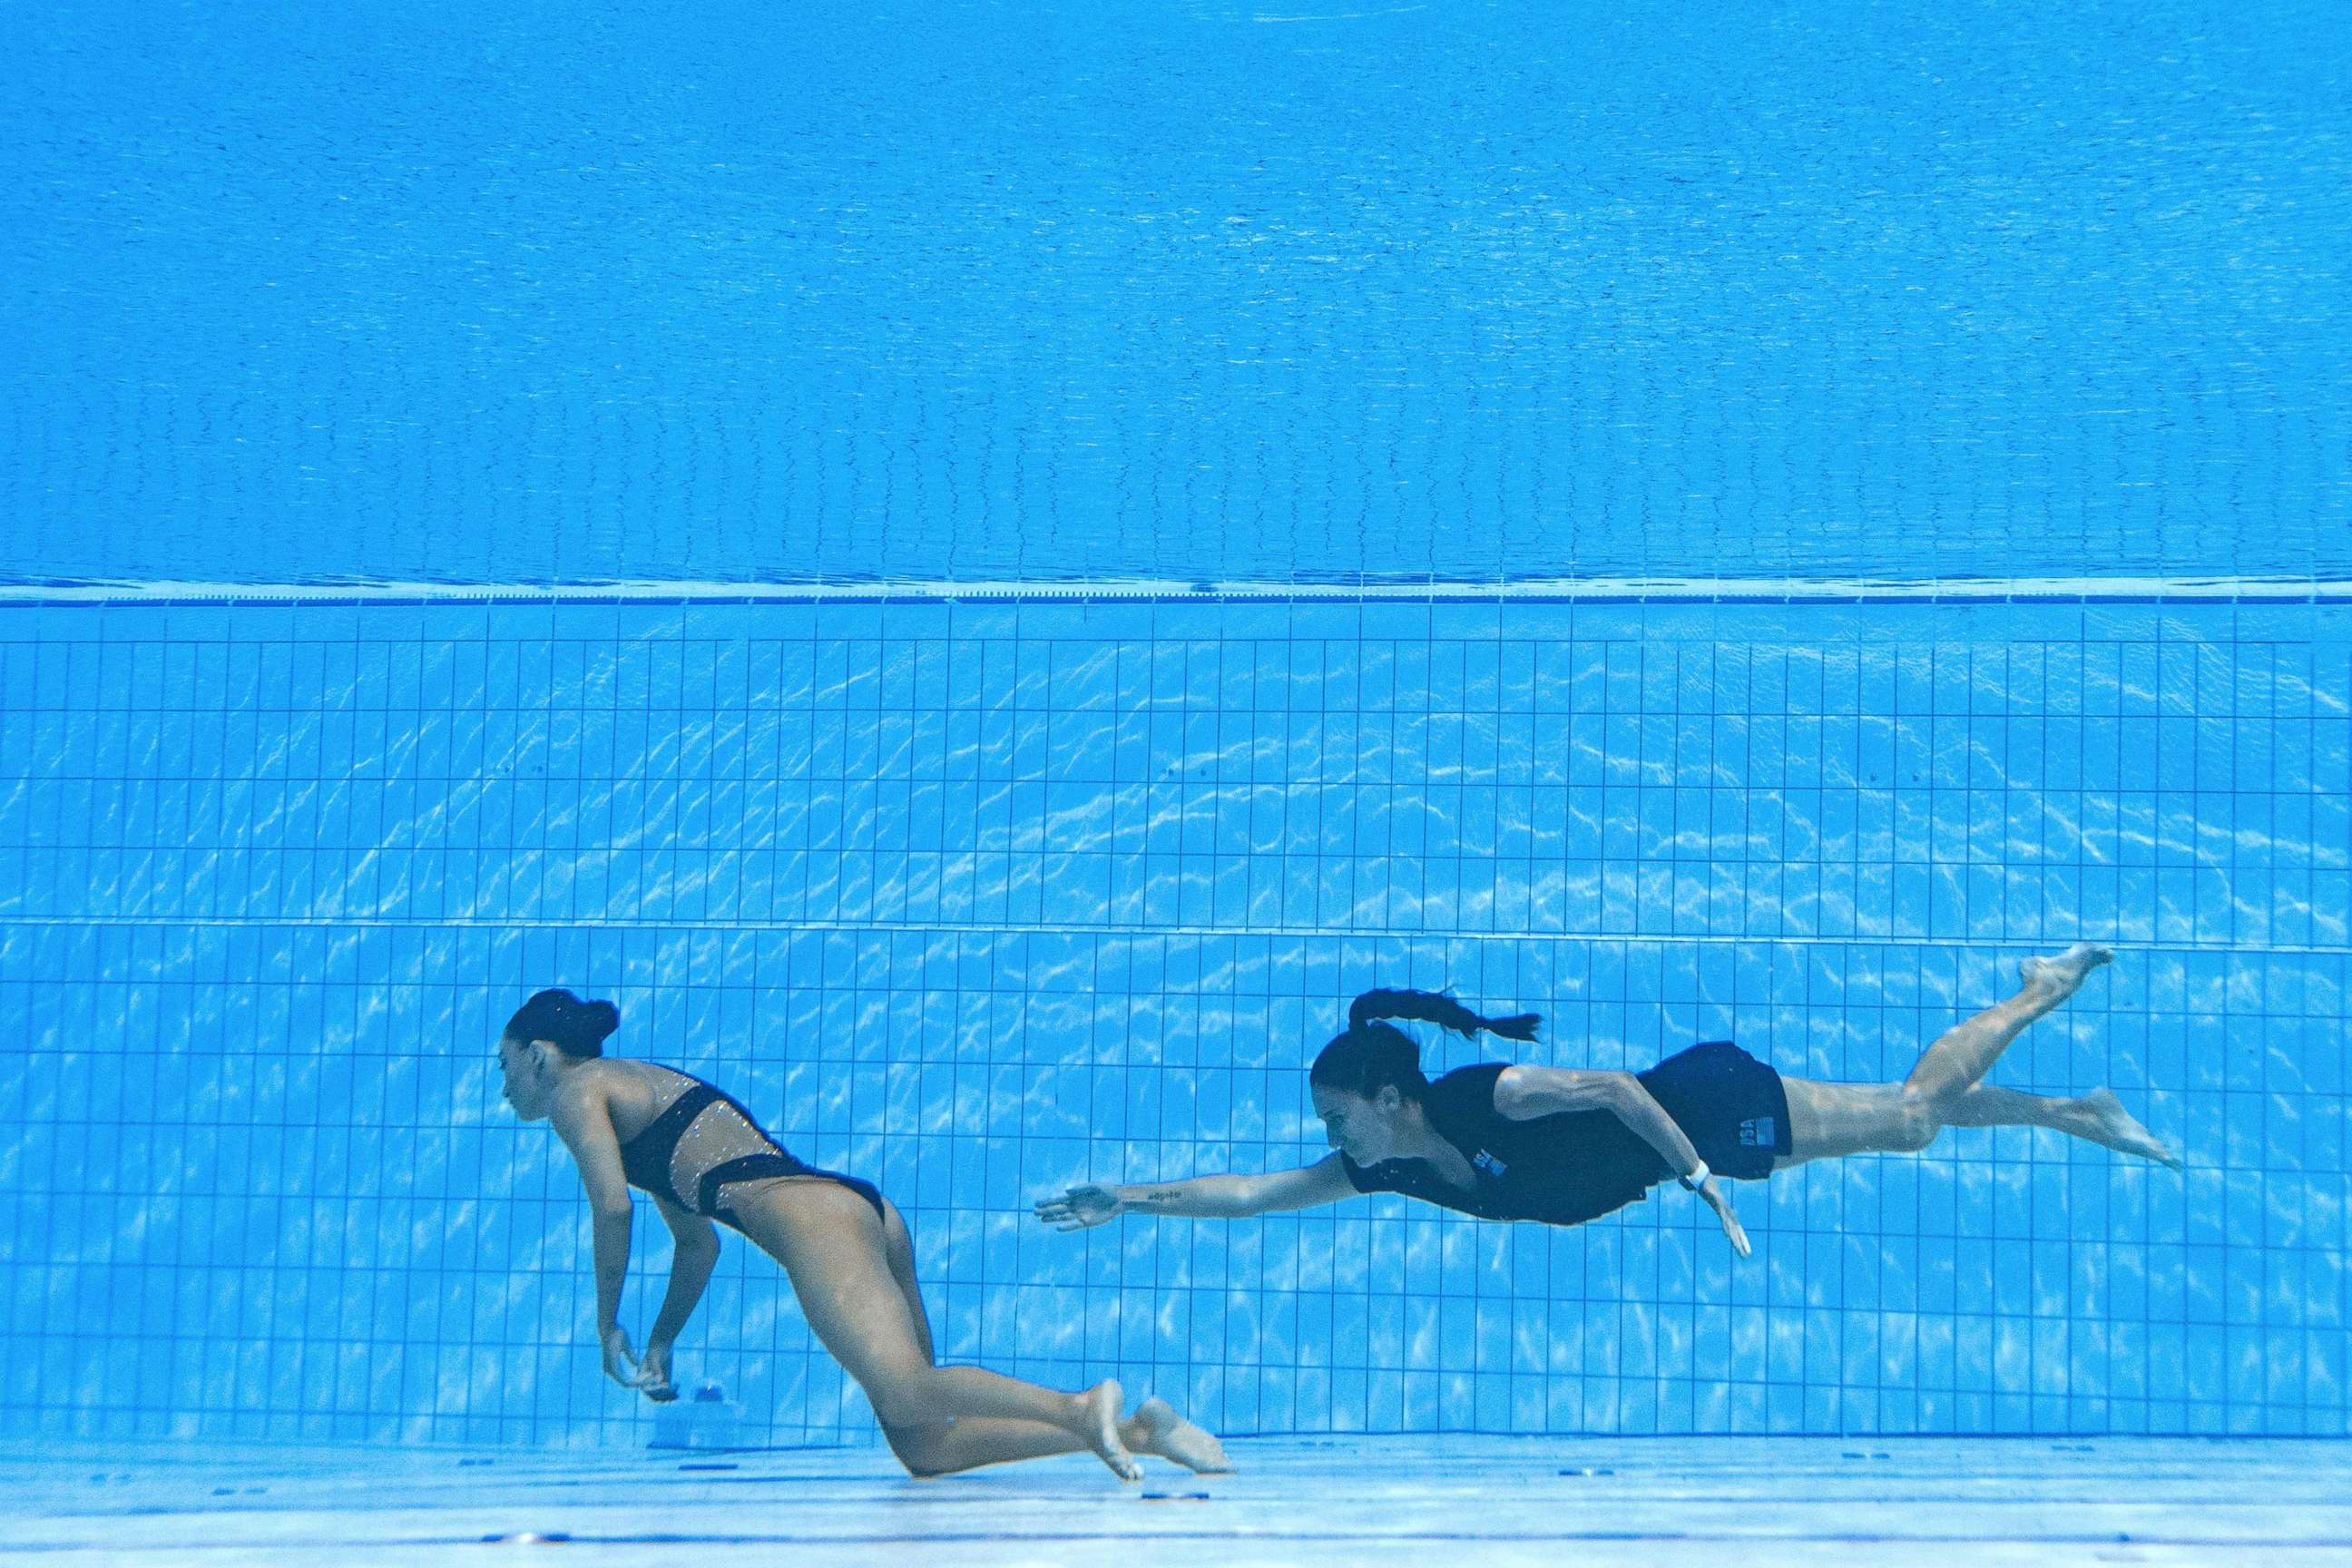 PHOTO: A member of Team USA swims to recover USA's Anita Alvarez, from the bottom of the pool during an incident in the women's solo free artistic swimming finals, during the Budapest 2022 World Aquatics Championships in Budapest on June 22, 2022.